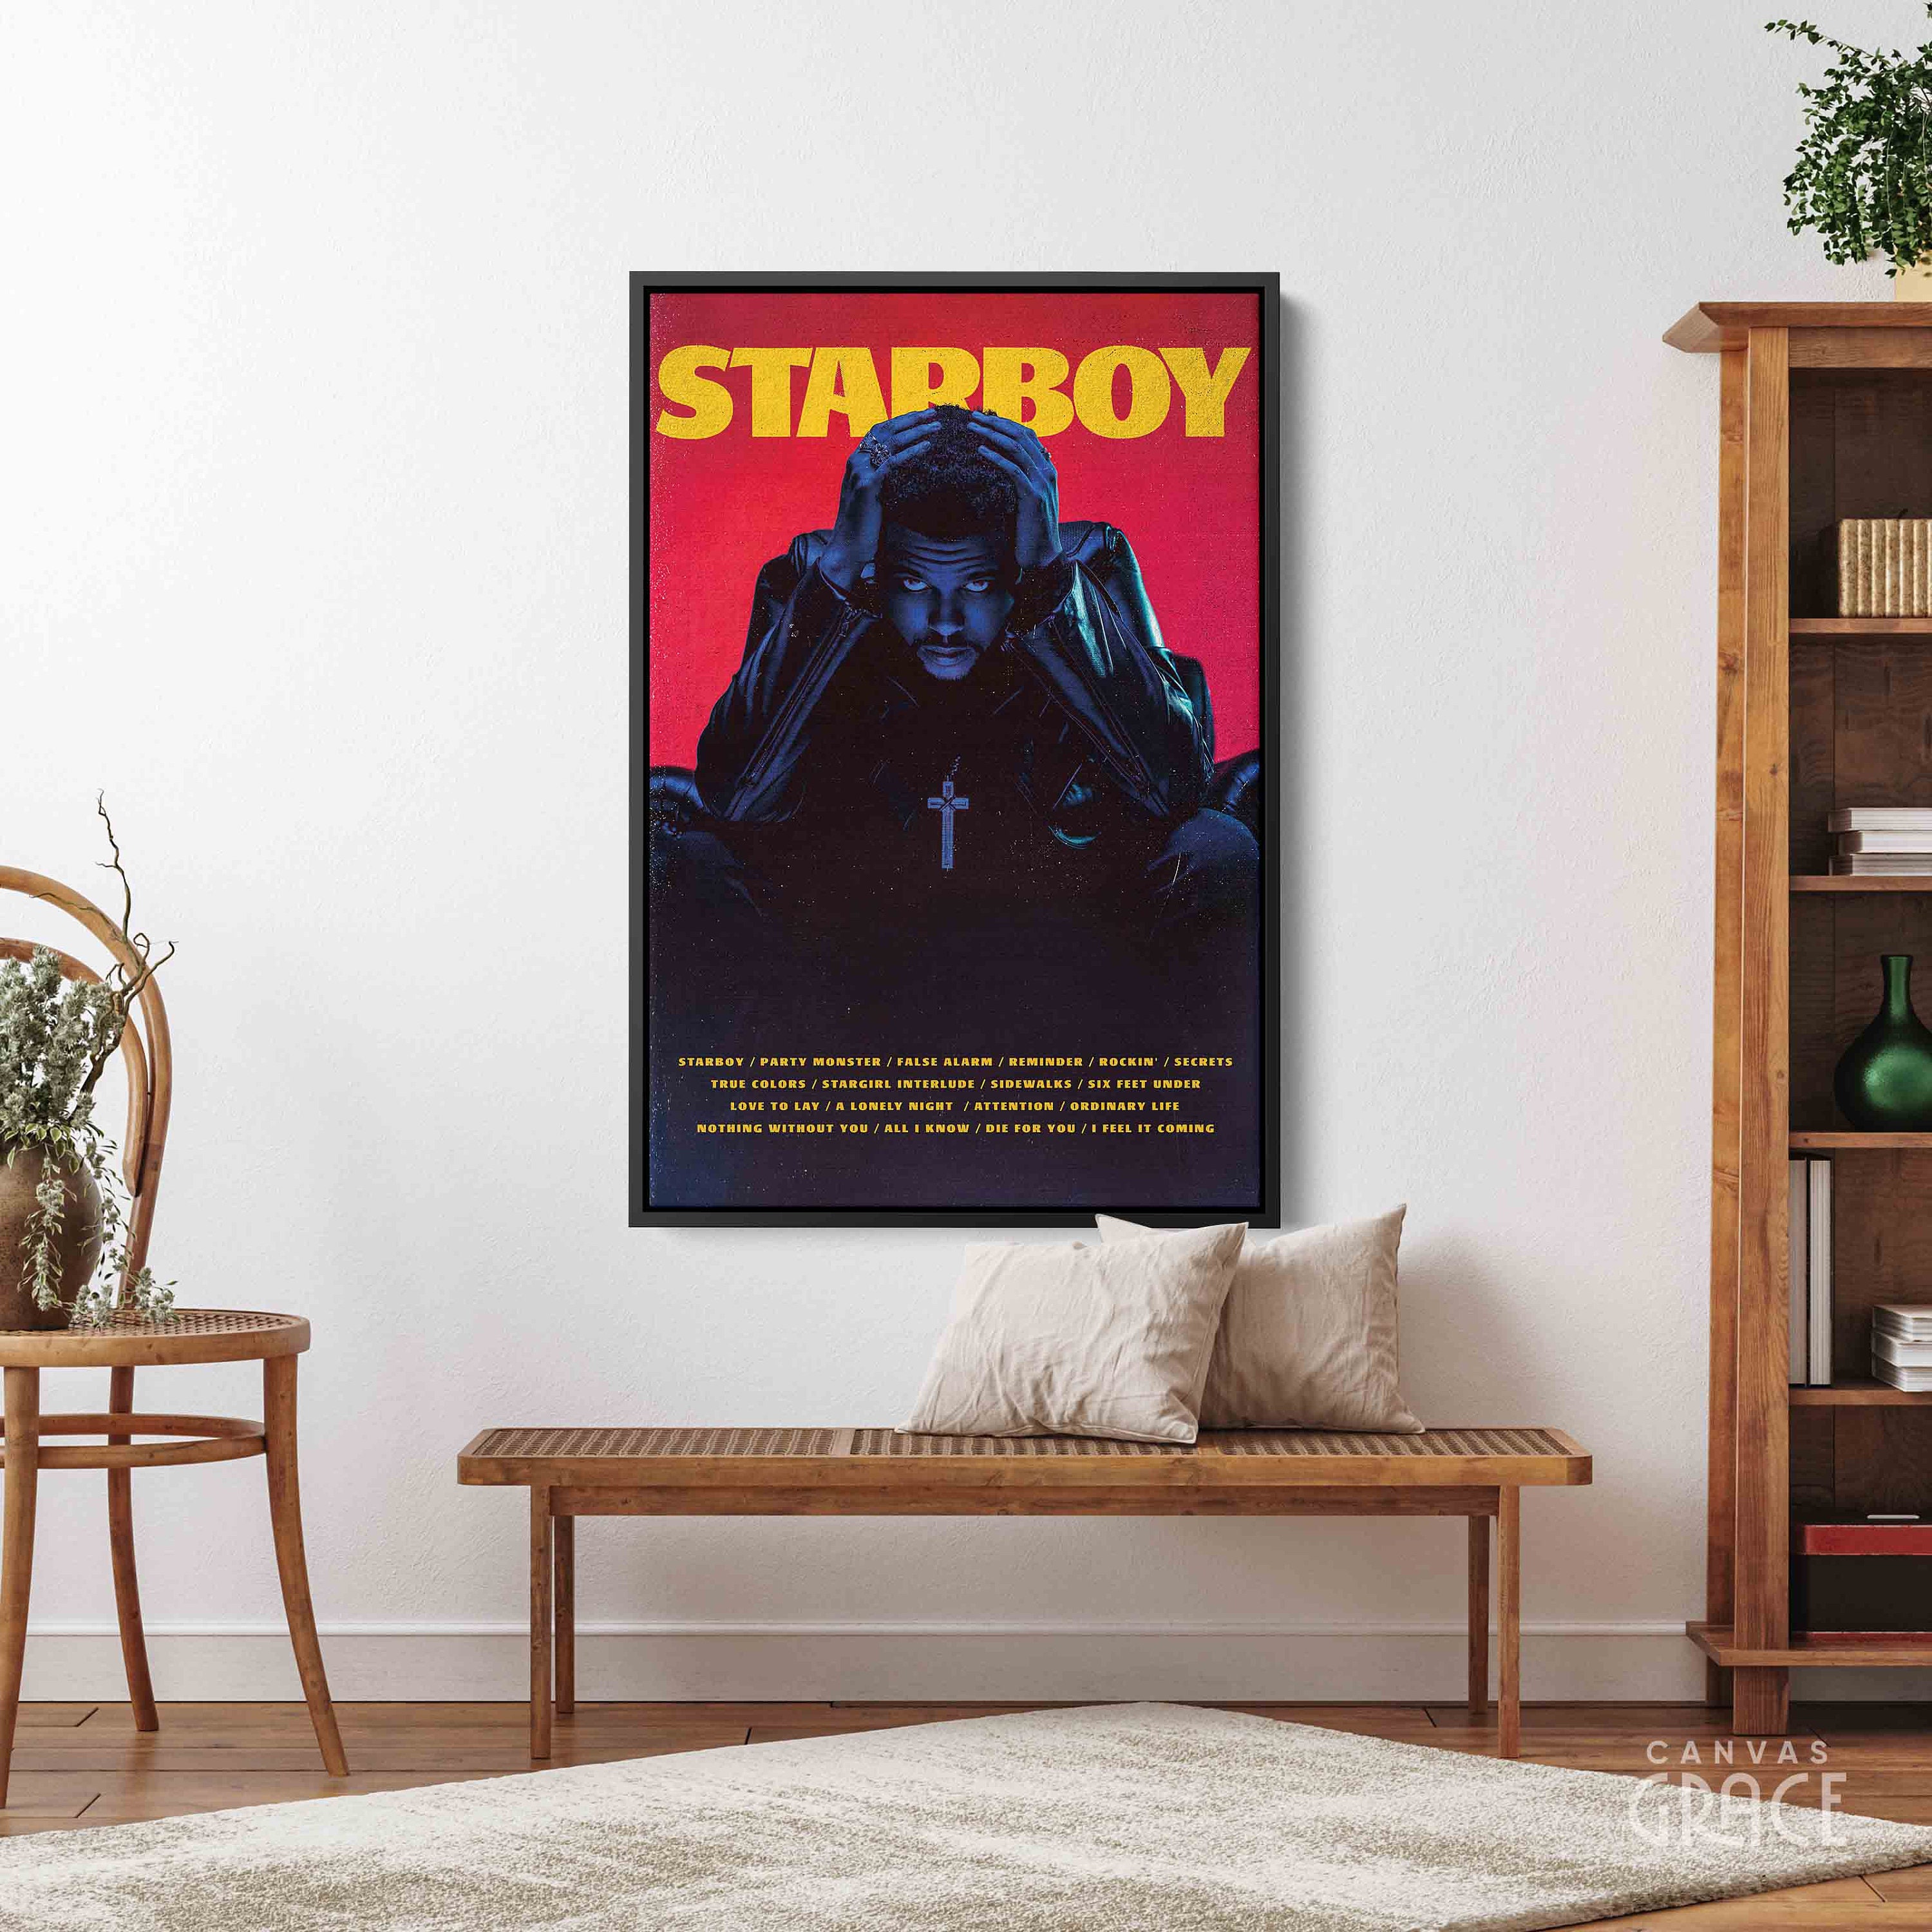 Kraft Paper Painting Picture, Weeknd Starboy Poster